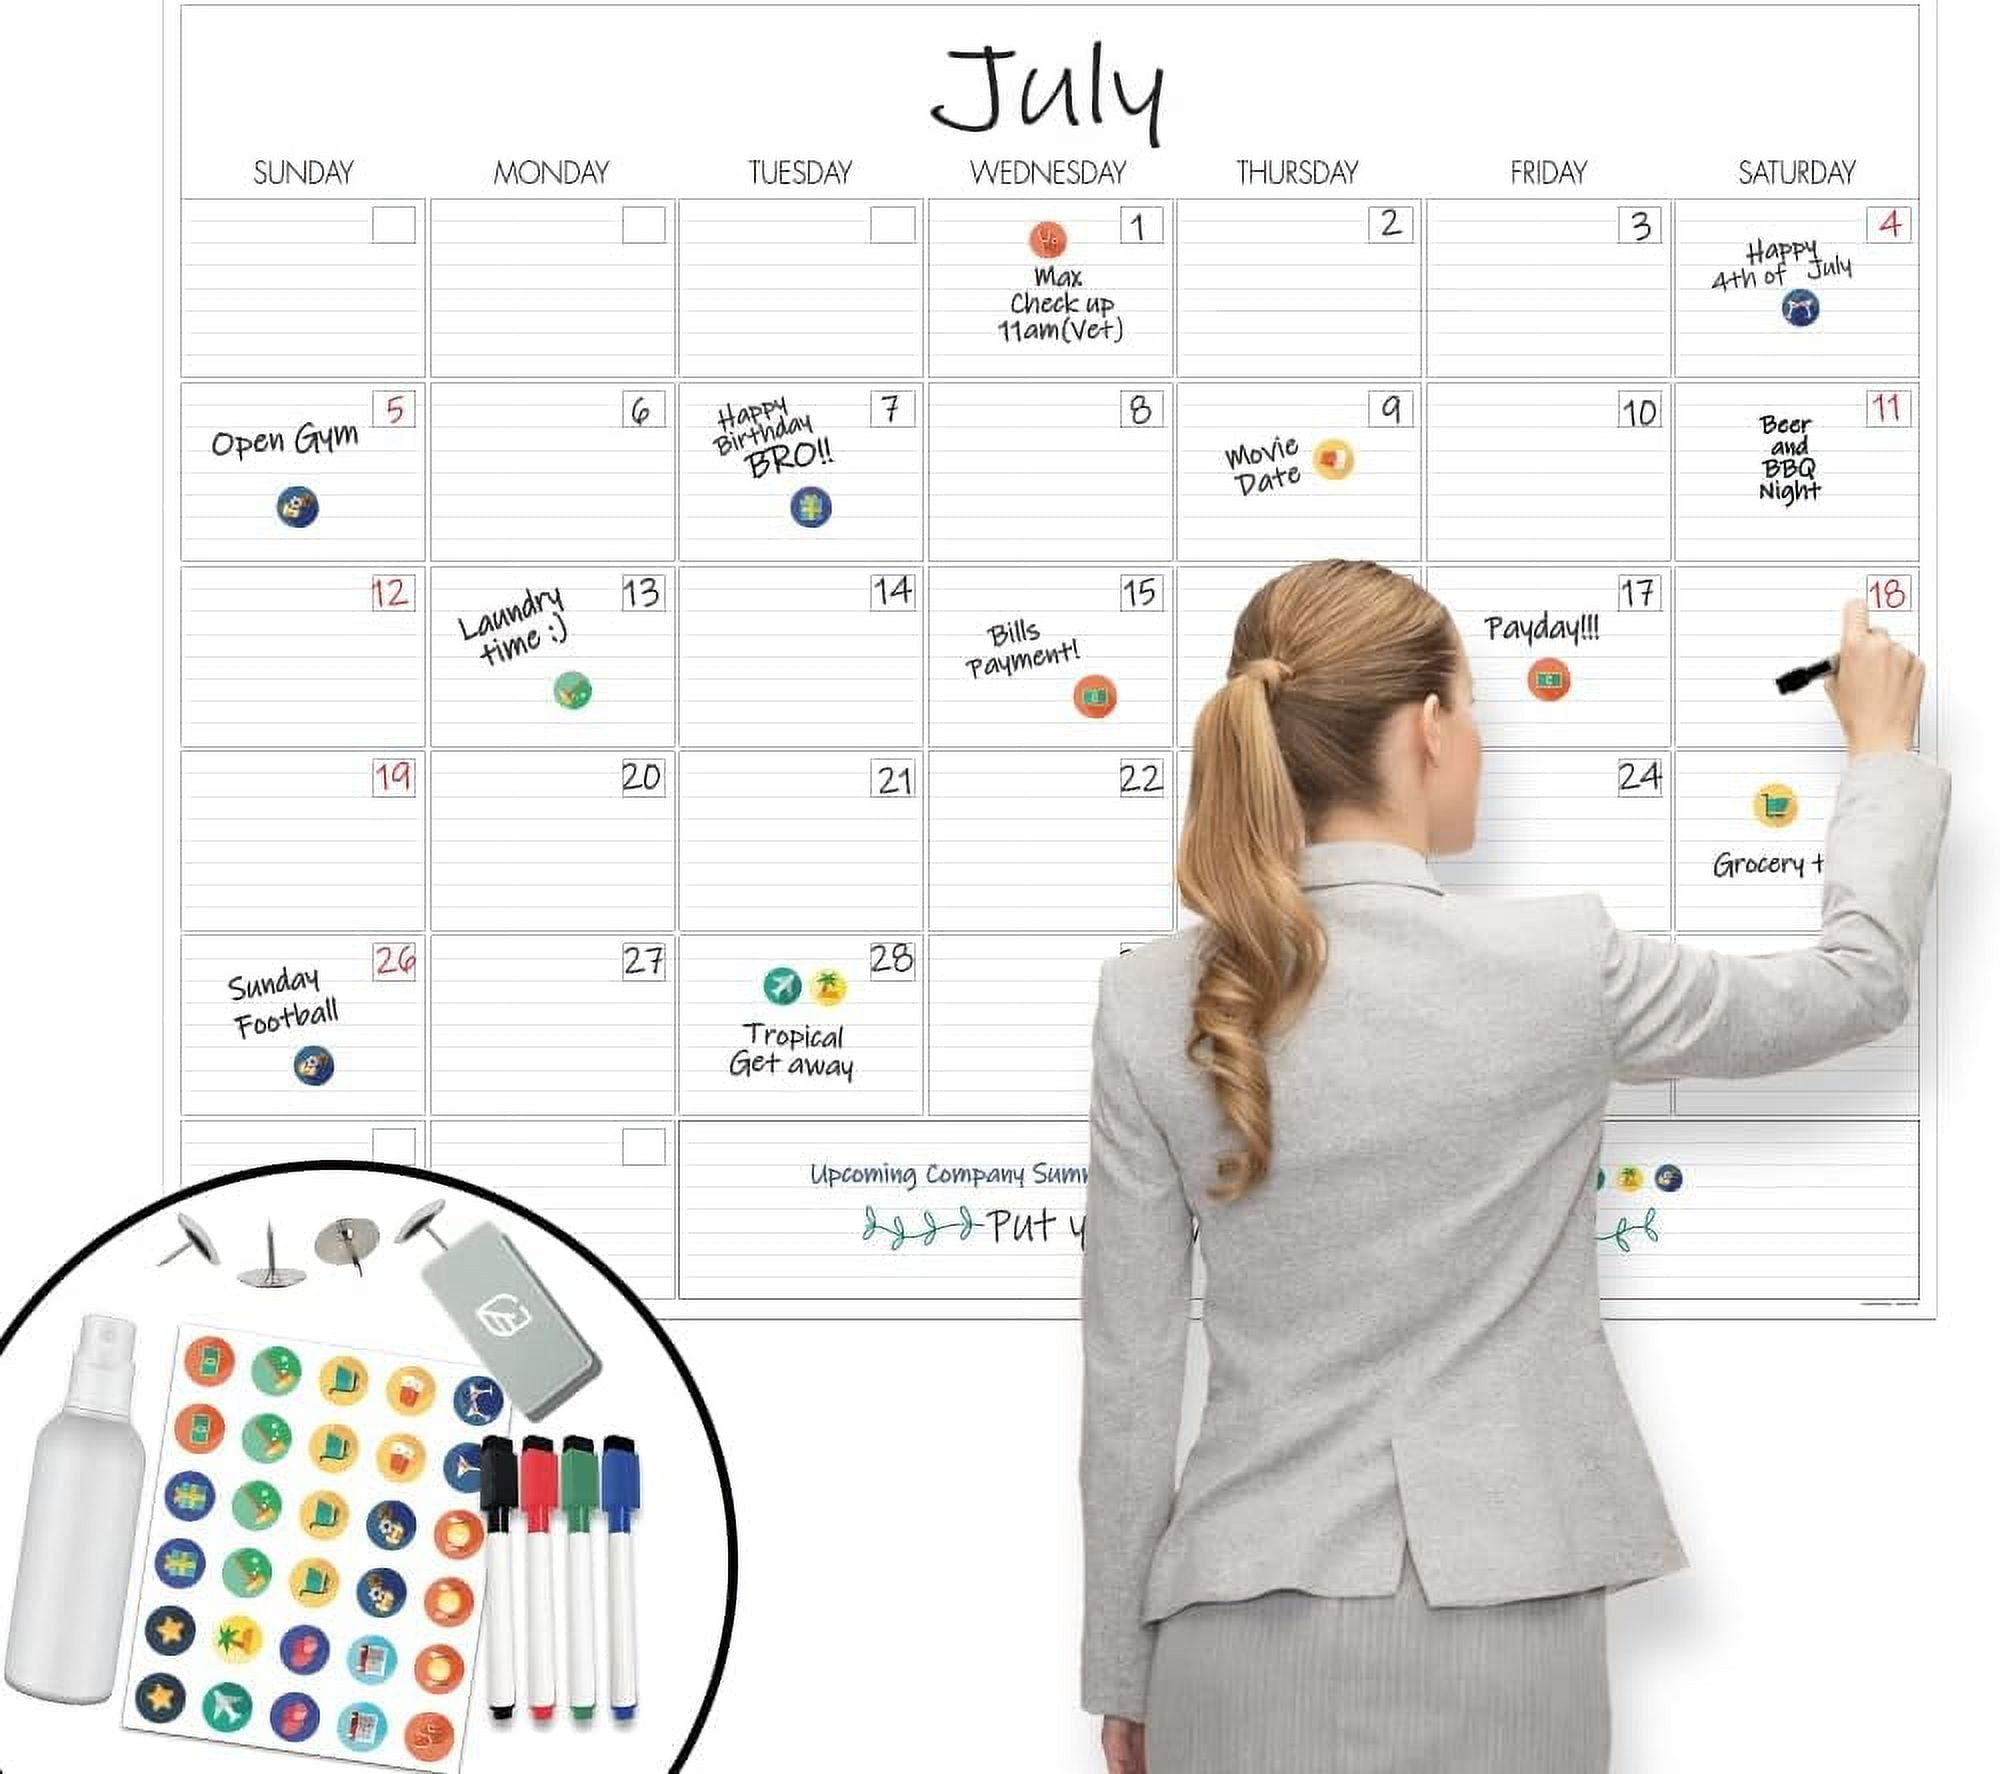 Large Dry Erase Calendar for Wall - Undated 3 Month Wall Calendar, 27.7 inch x 40 inch, Erasable & Reusable Laminated White Board Calendar with 8